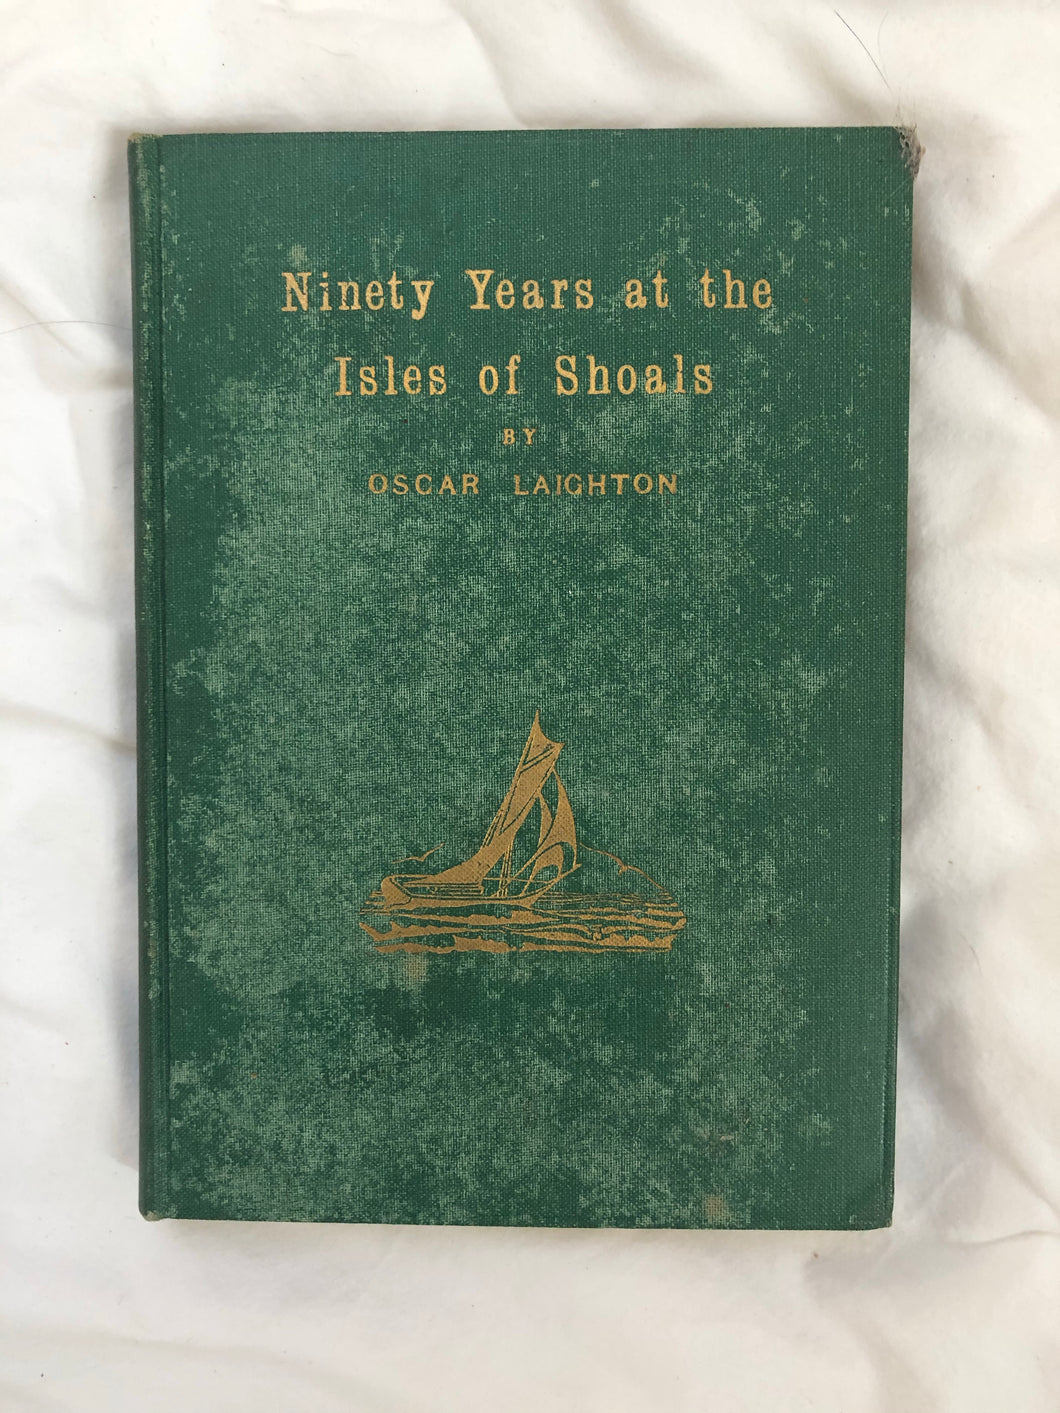 “Ninety Years at the Isles of Shoals” by Oscar Laighton. SIGNED